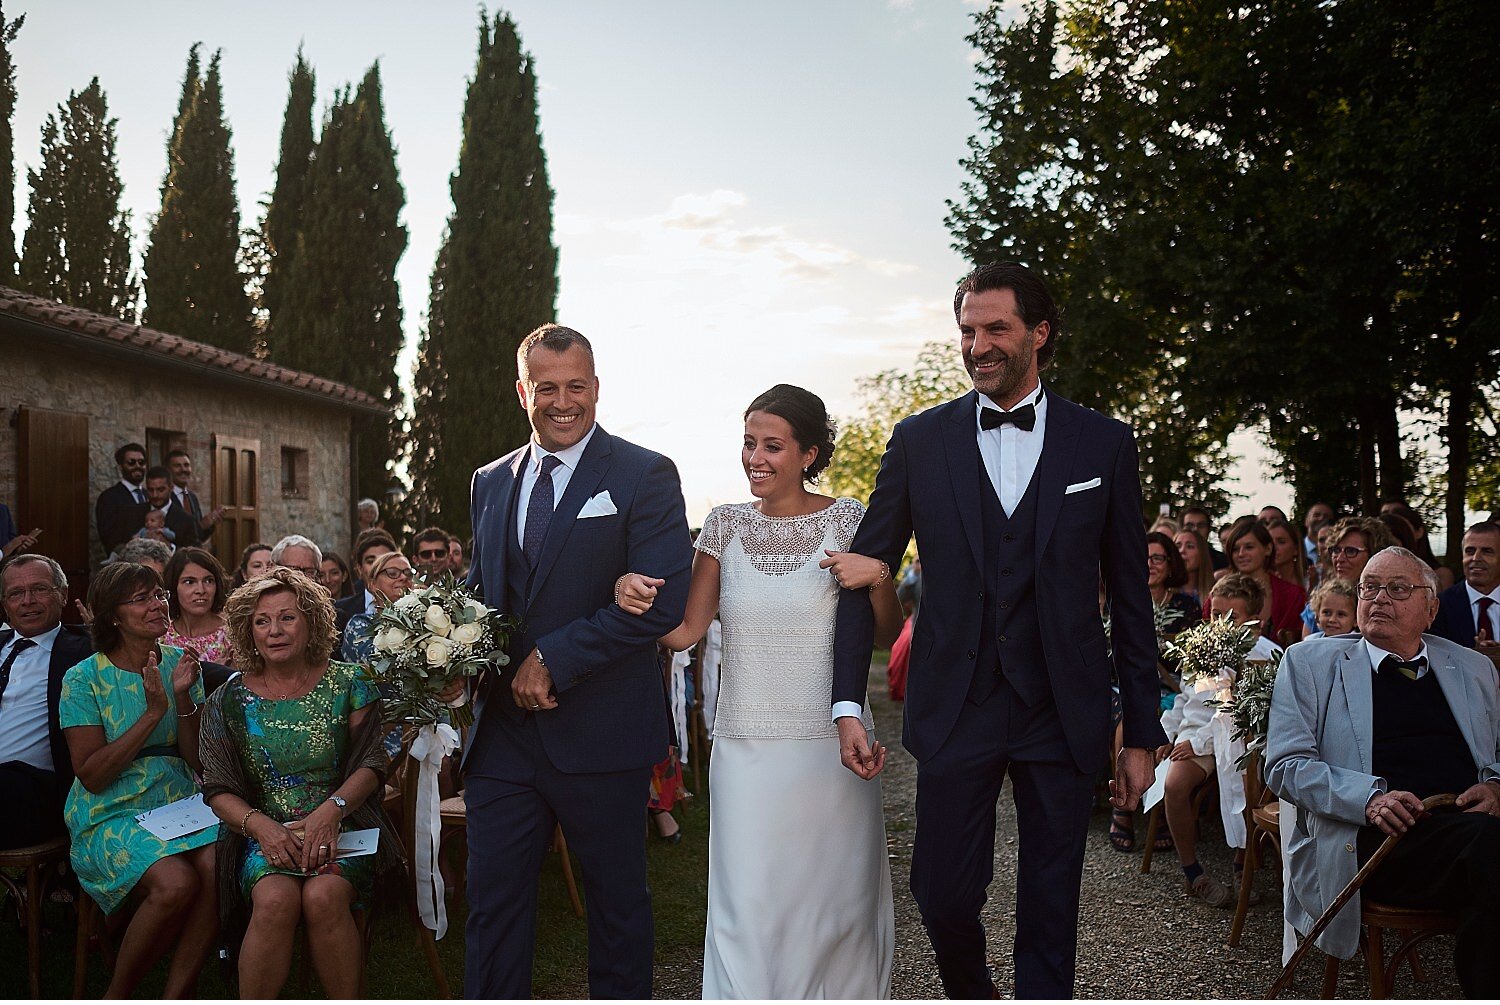  Italo-Hispanic wedding in the heart of Chianti, in the splendid village of Pietrafitta, between Siena and Florence. A symbolic ceremony in the garden with a spectacular view of the surrounding landscape. Reception with typical Tuscan menu and local 